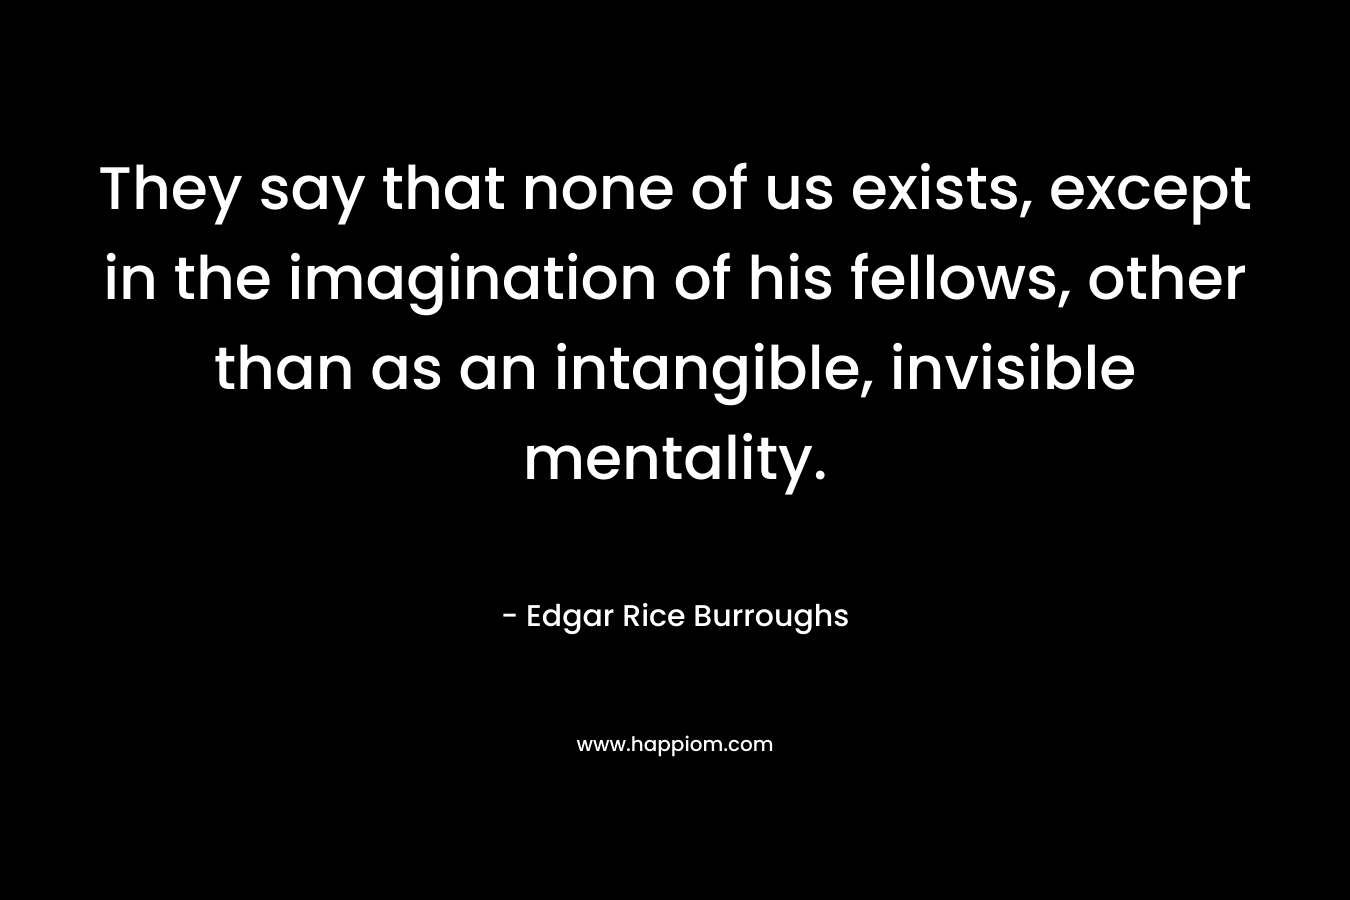 They say that none of us exists, except in the imagination of his fellows, other than as an intangible, invisible mentality.